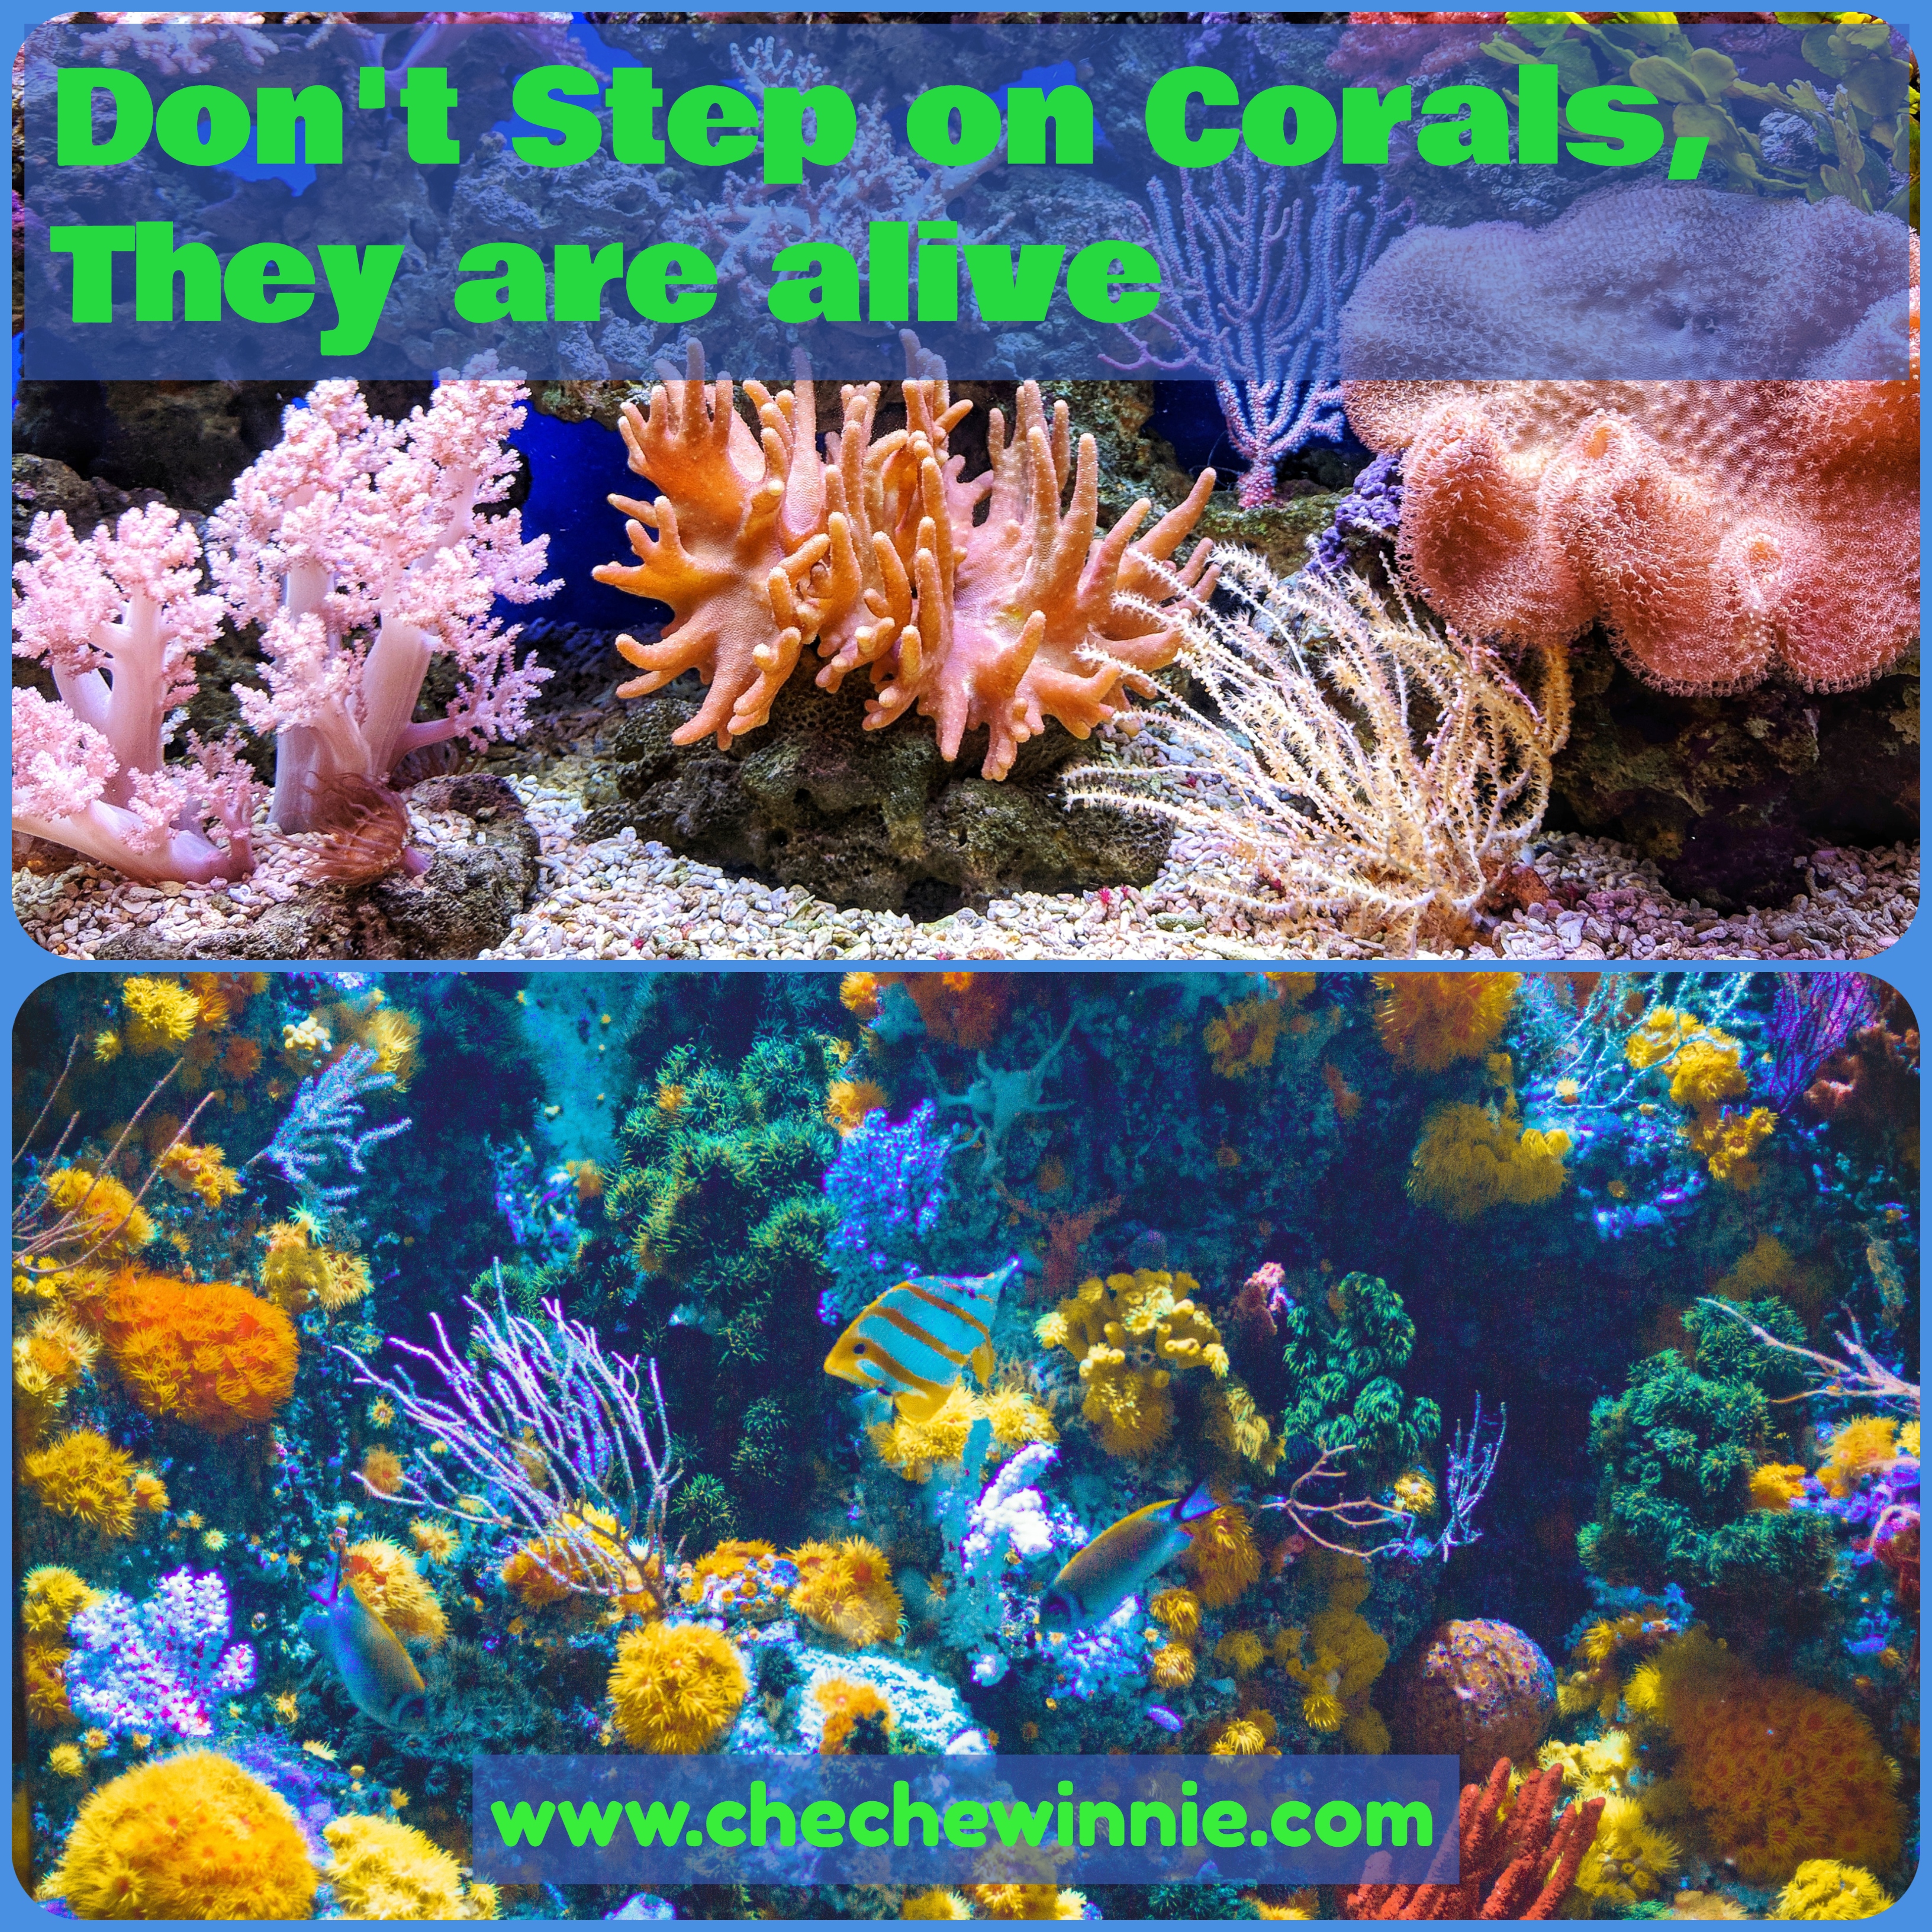 Don't Step on Corals, They are alive